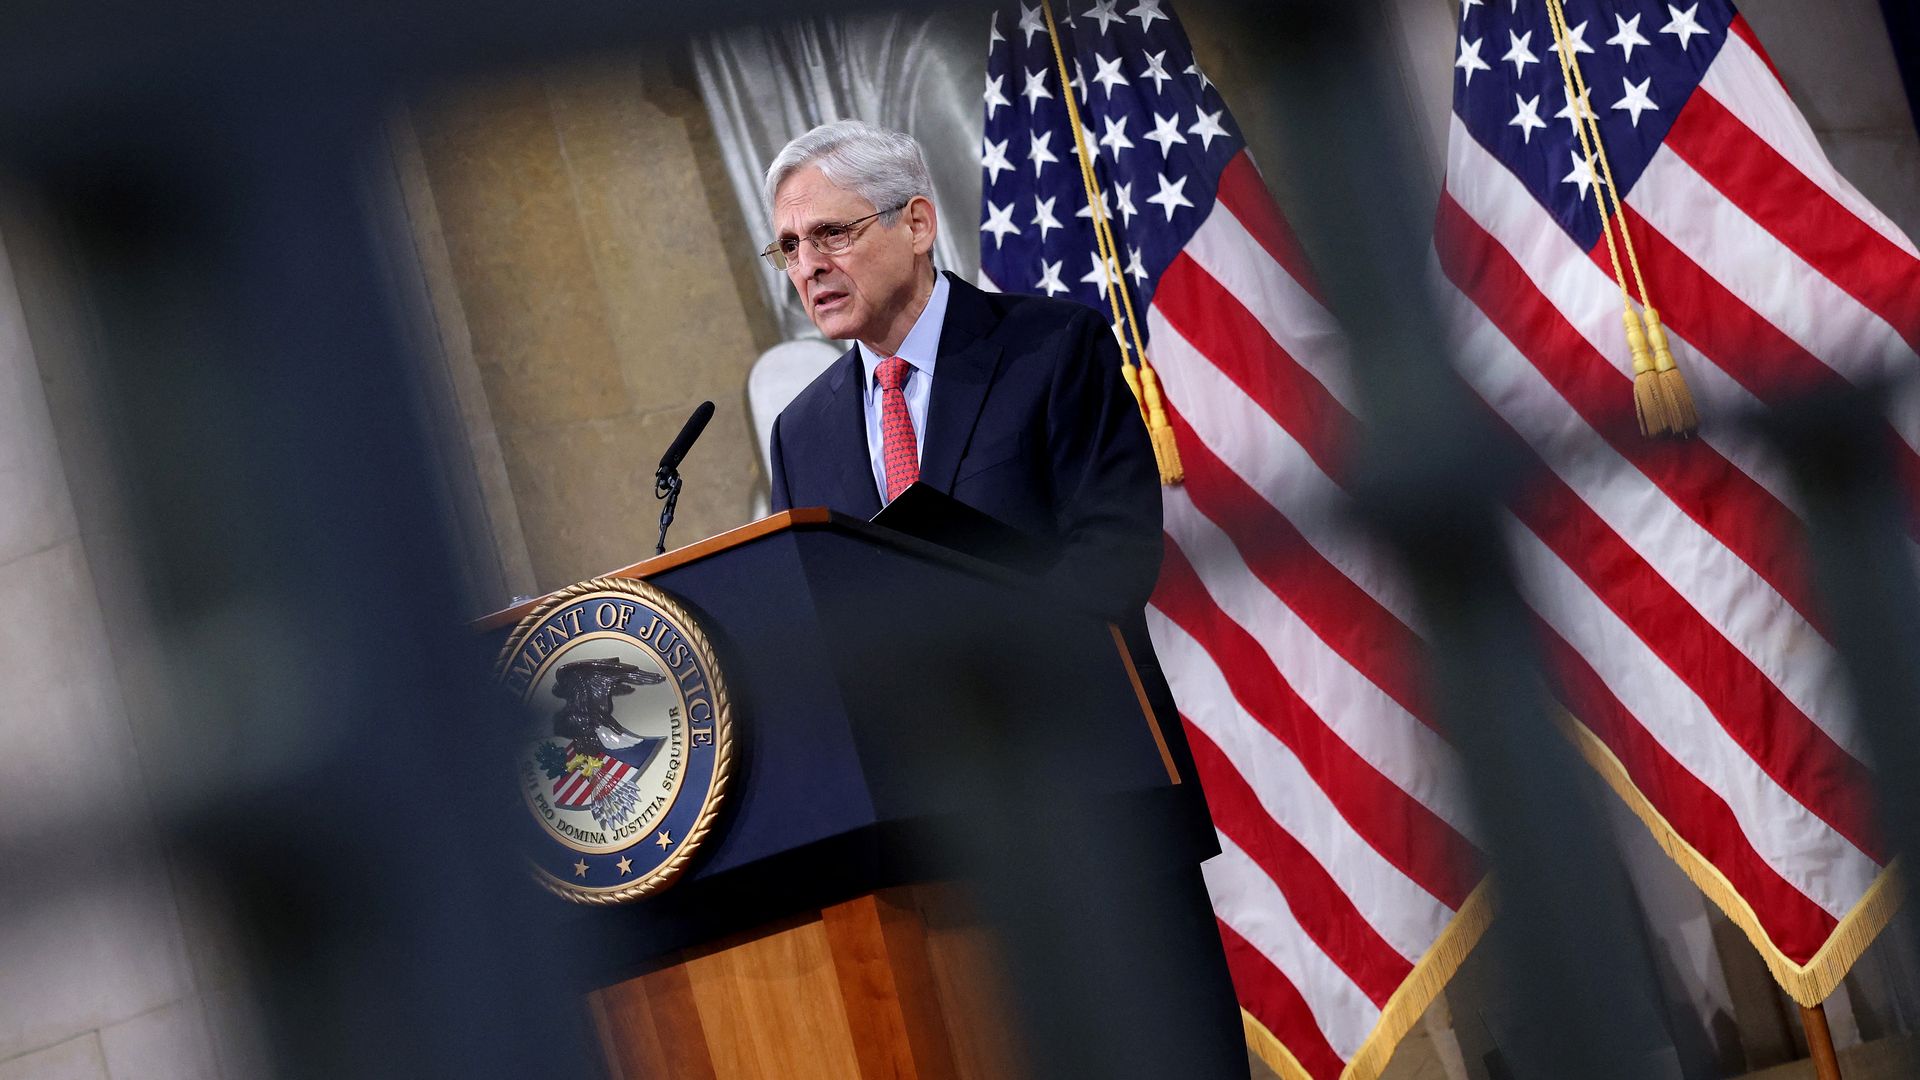 Photo of Merrick Garland speaking from a podium with the American flag behind him